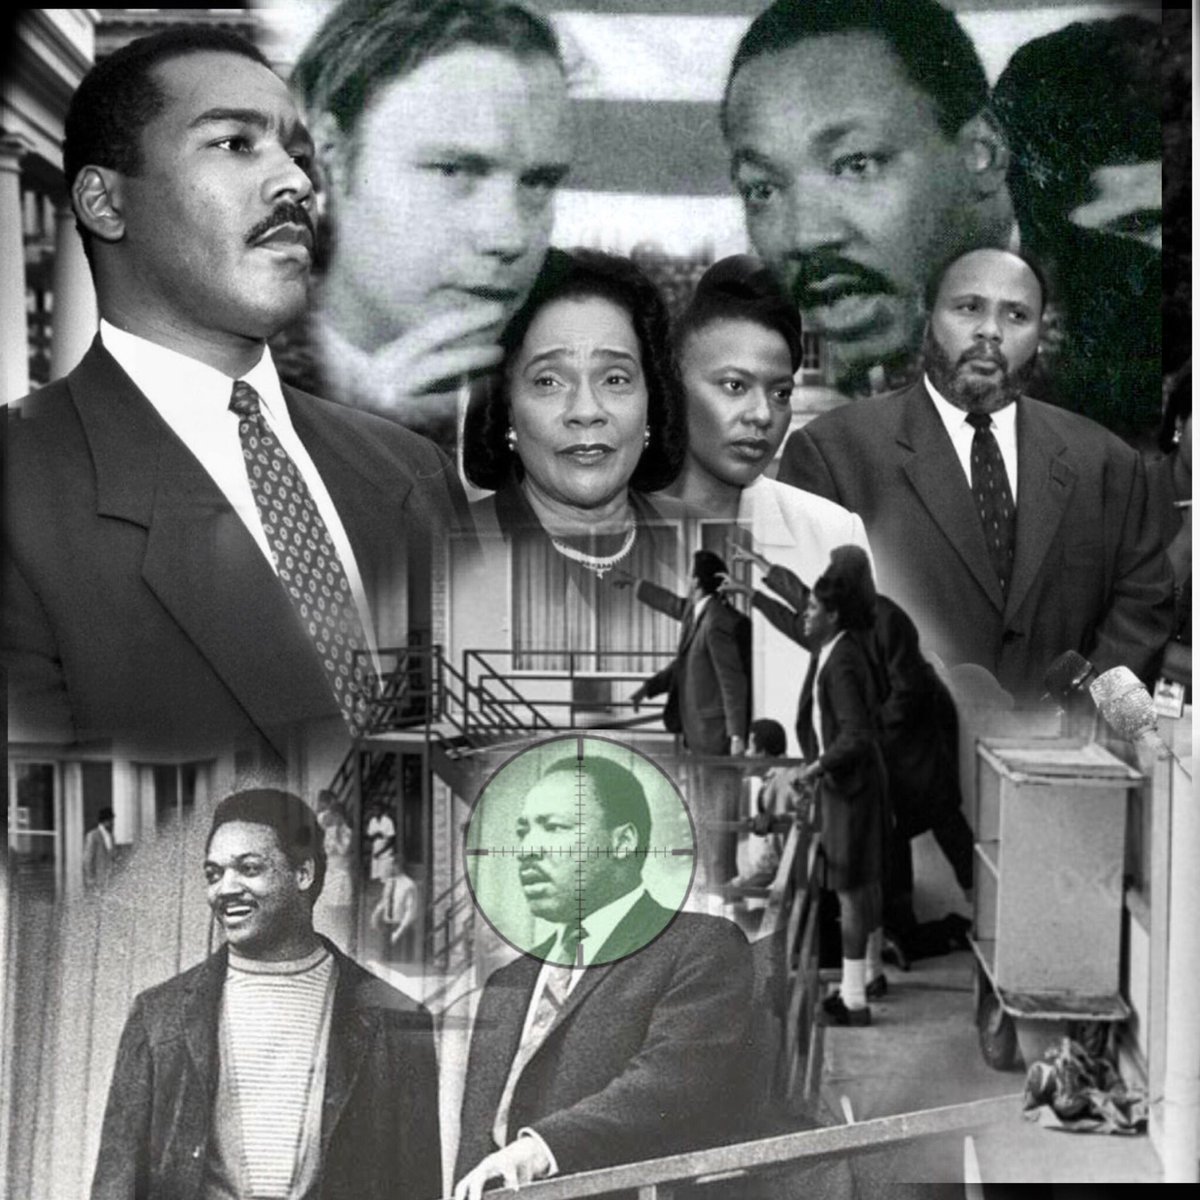 In Order To Prove The United States Government Killed  #DrKing A Family Friend & Attorney Had To Prove James Earl Ray Didn’t Shoot DrKing  #MLKDAY  